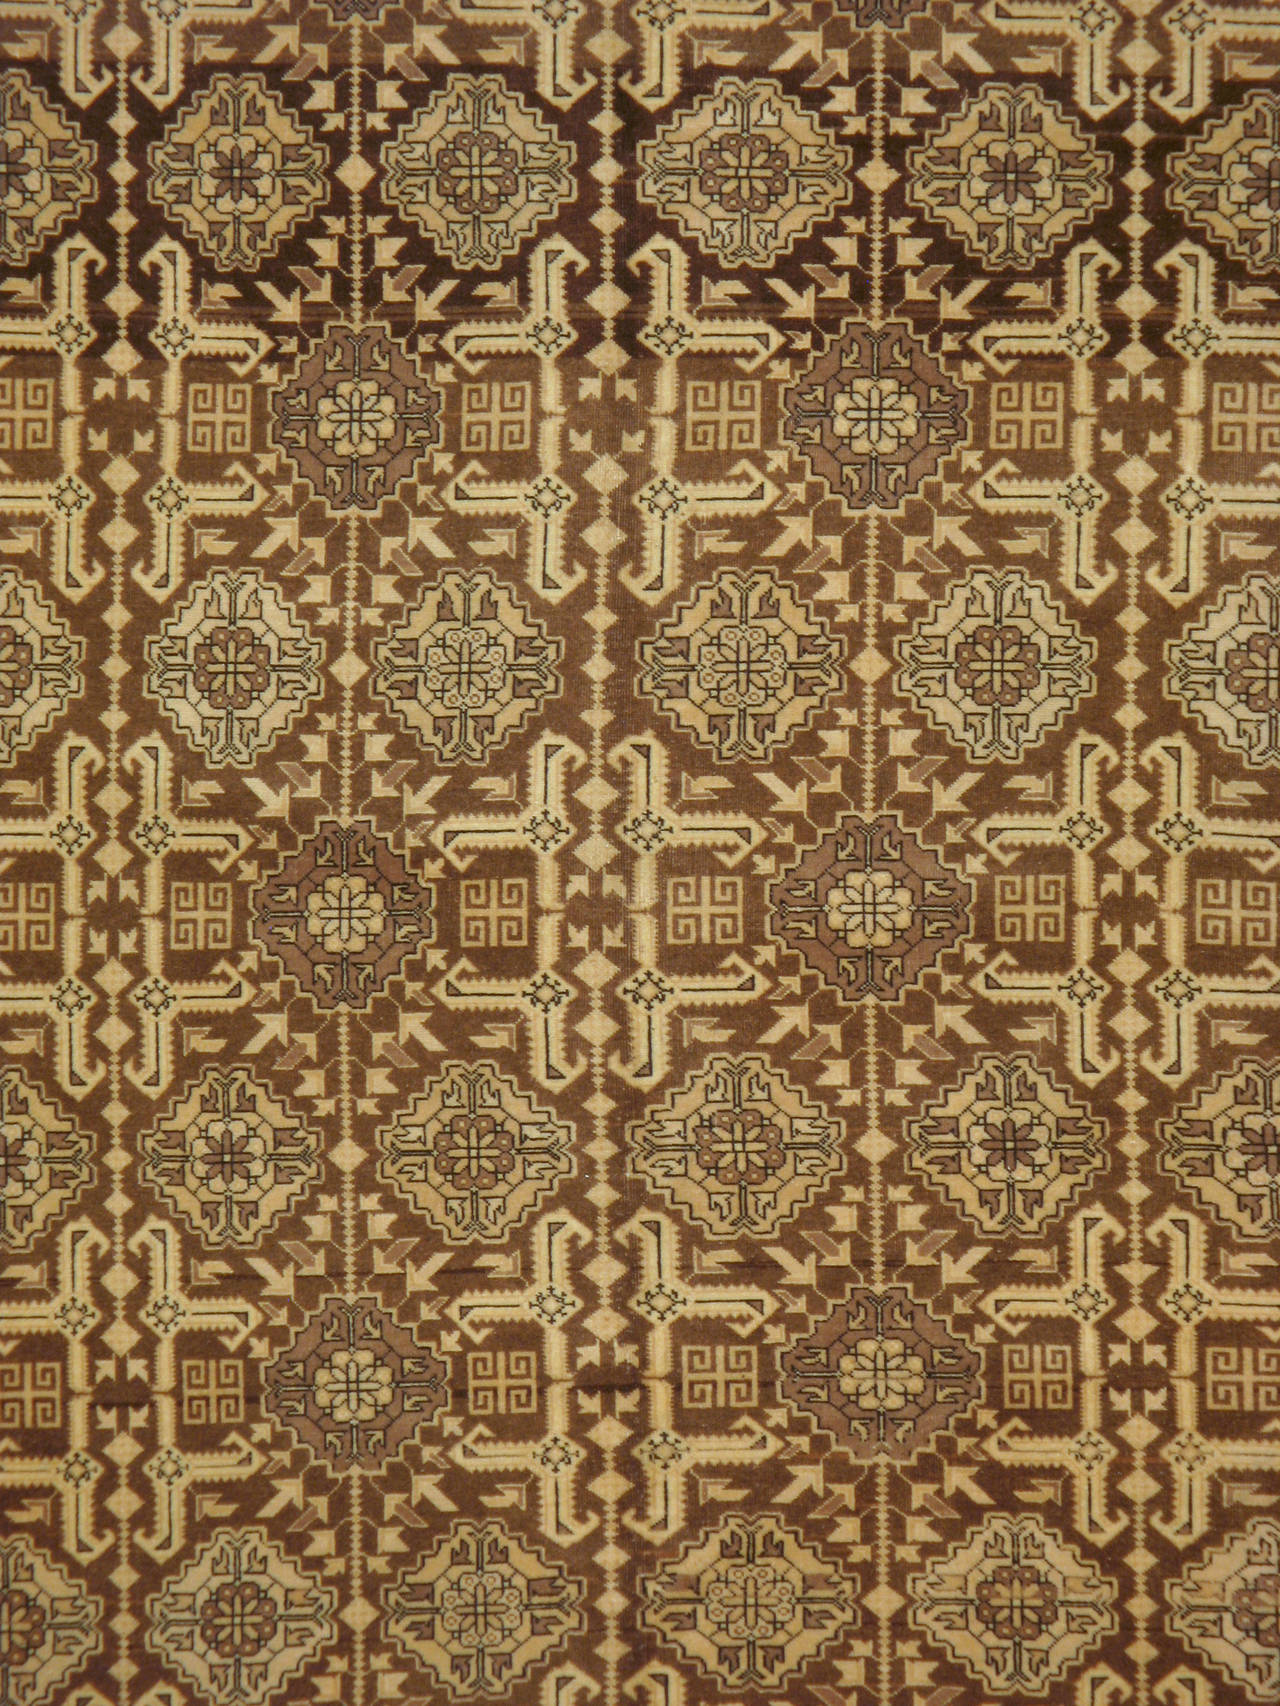 A vintage Persian Tabriz carpet from the second quarter of the 20th century.